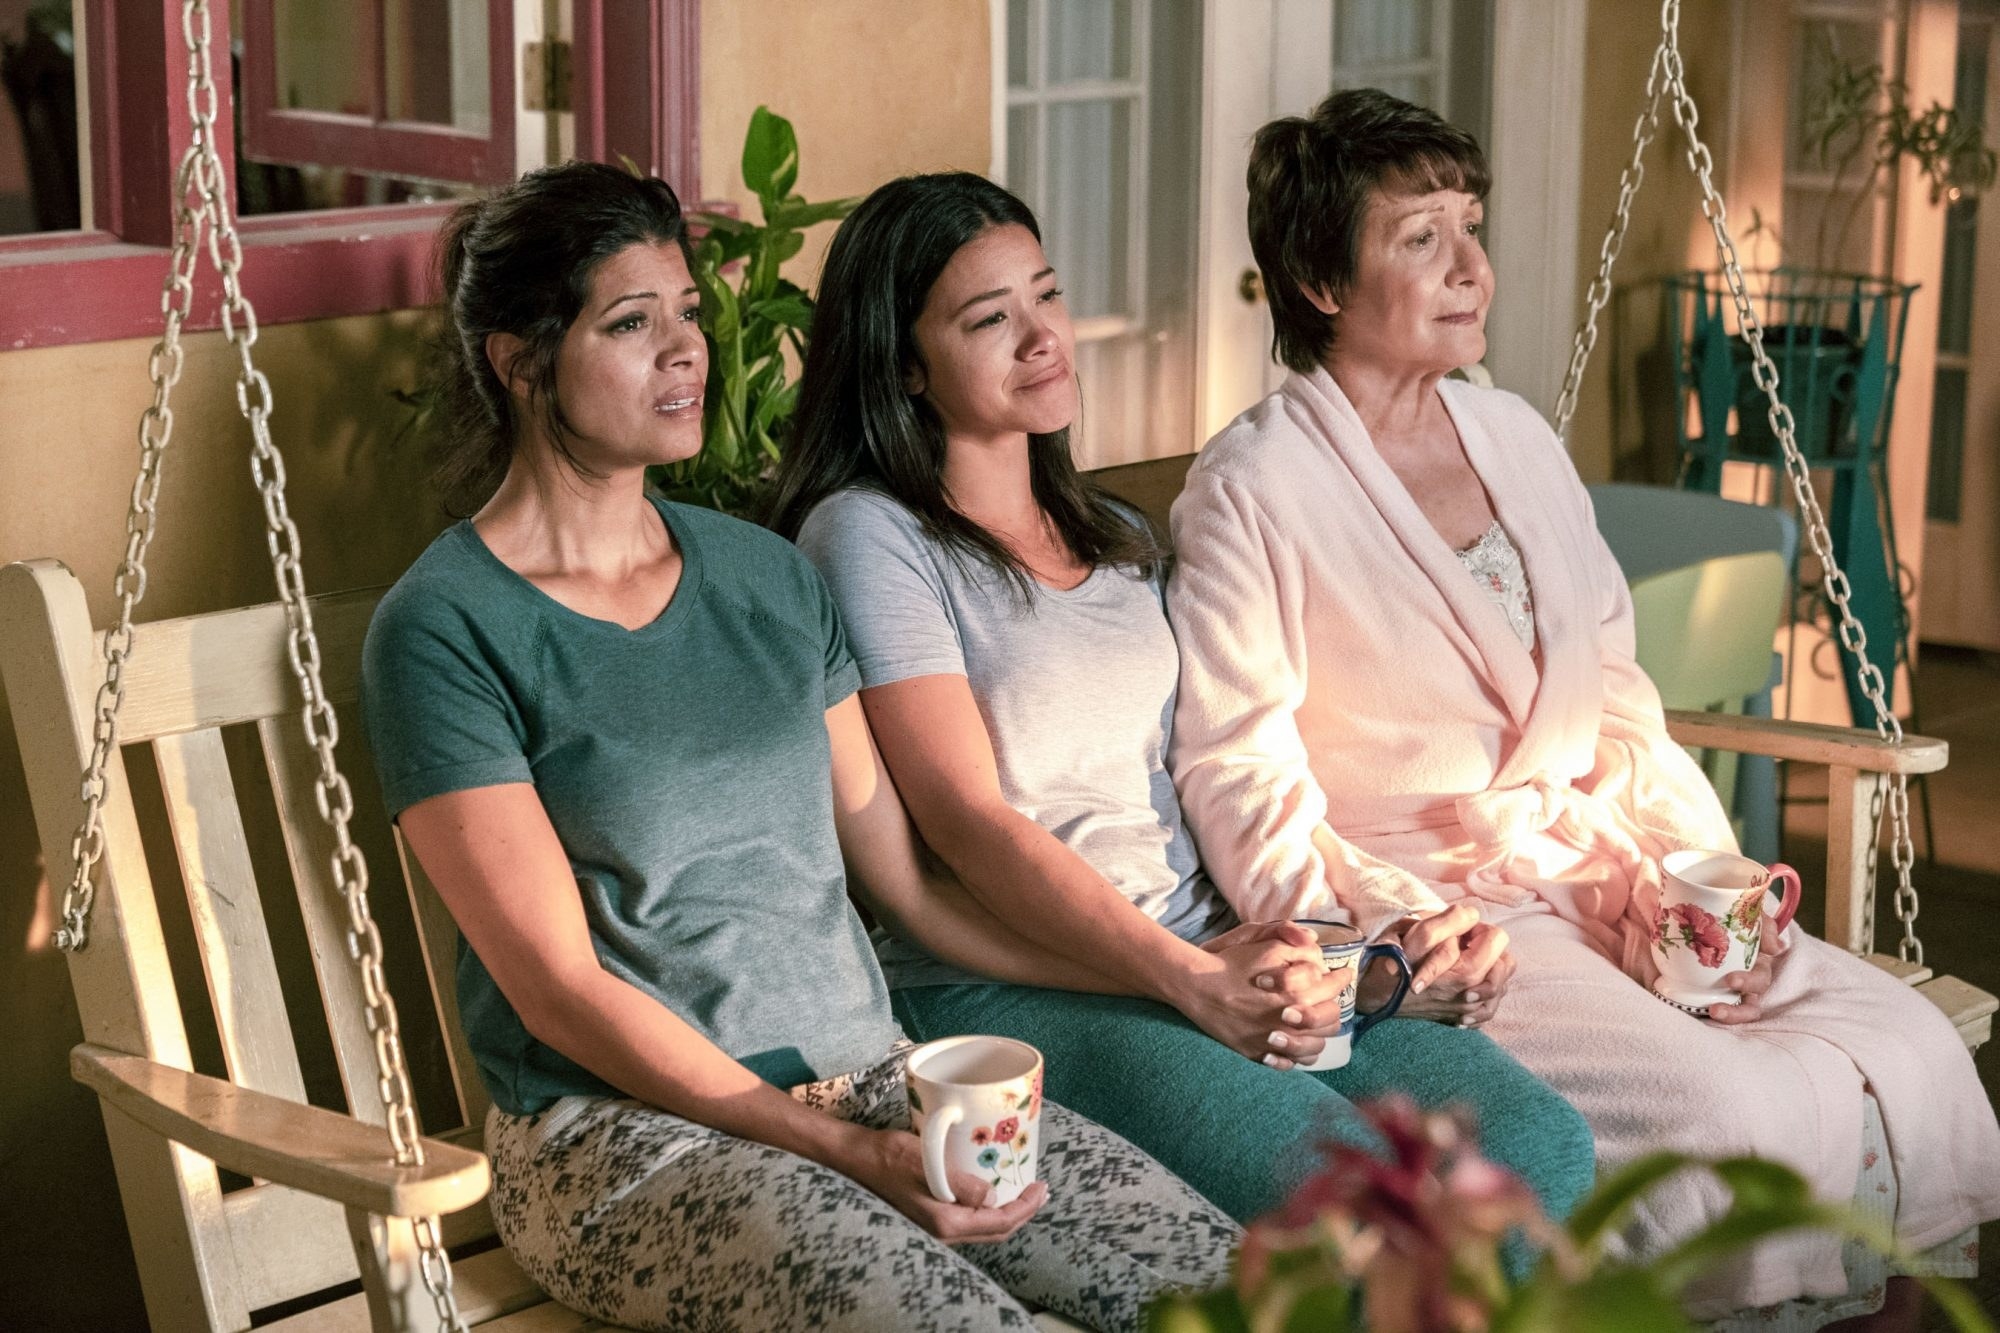 Jane, Xiomara, and Abuela sitting with matching coffee mugs in their hands and smiling with tears in their eyes